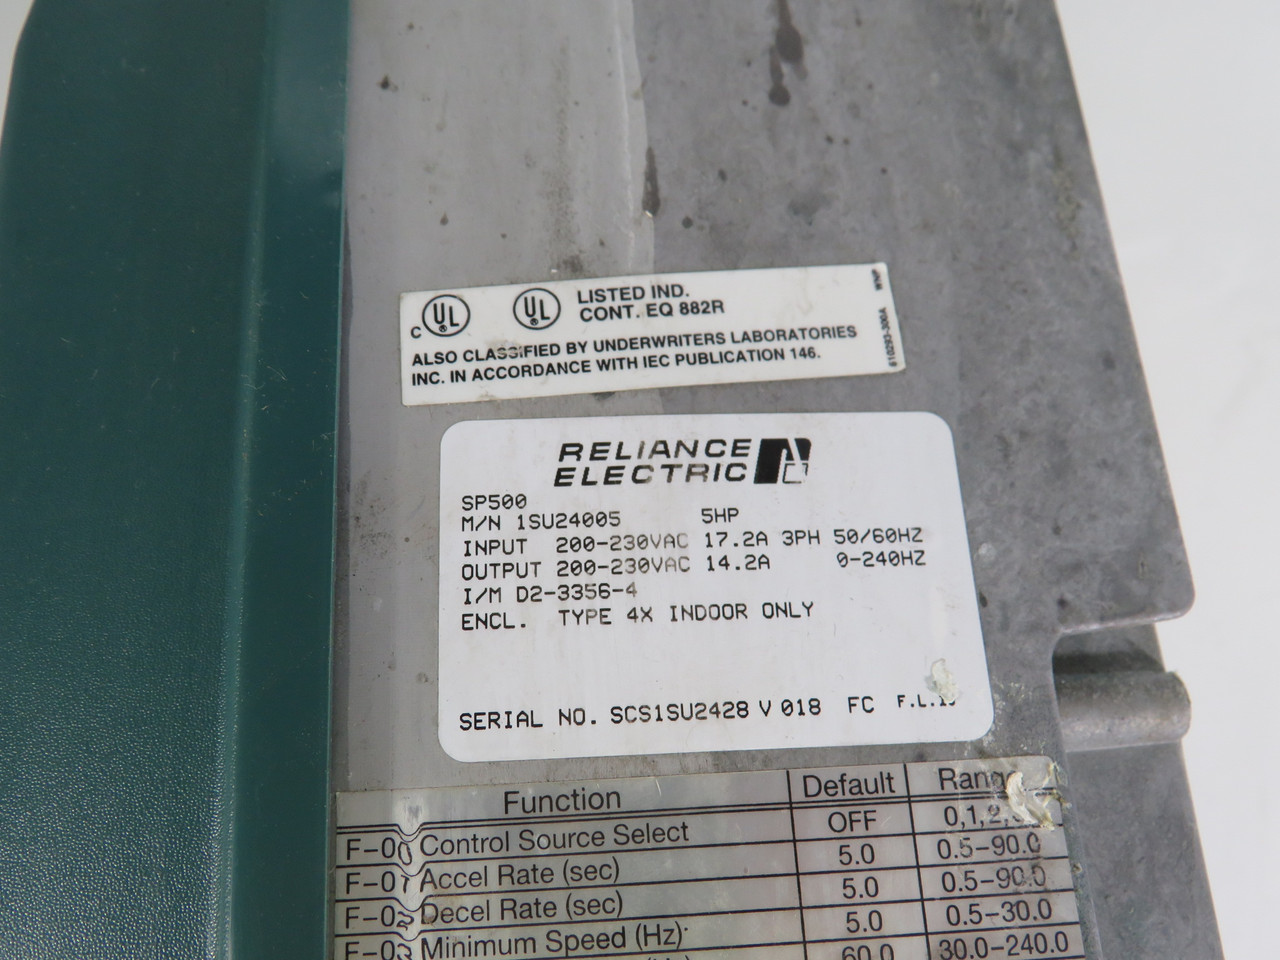 Reliance Electric 1SU24005 AC Drive Sp500 5HP 200-230VAC 14,2A 0-240HZ AS IS